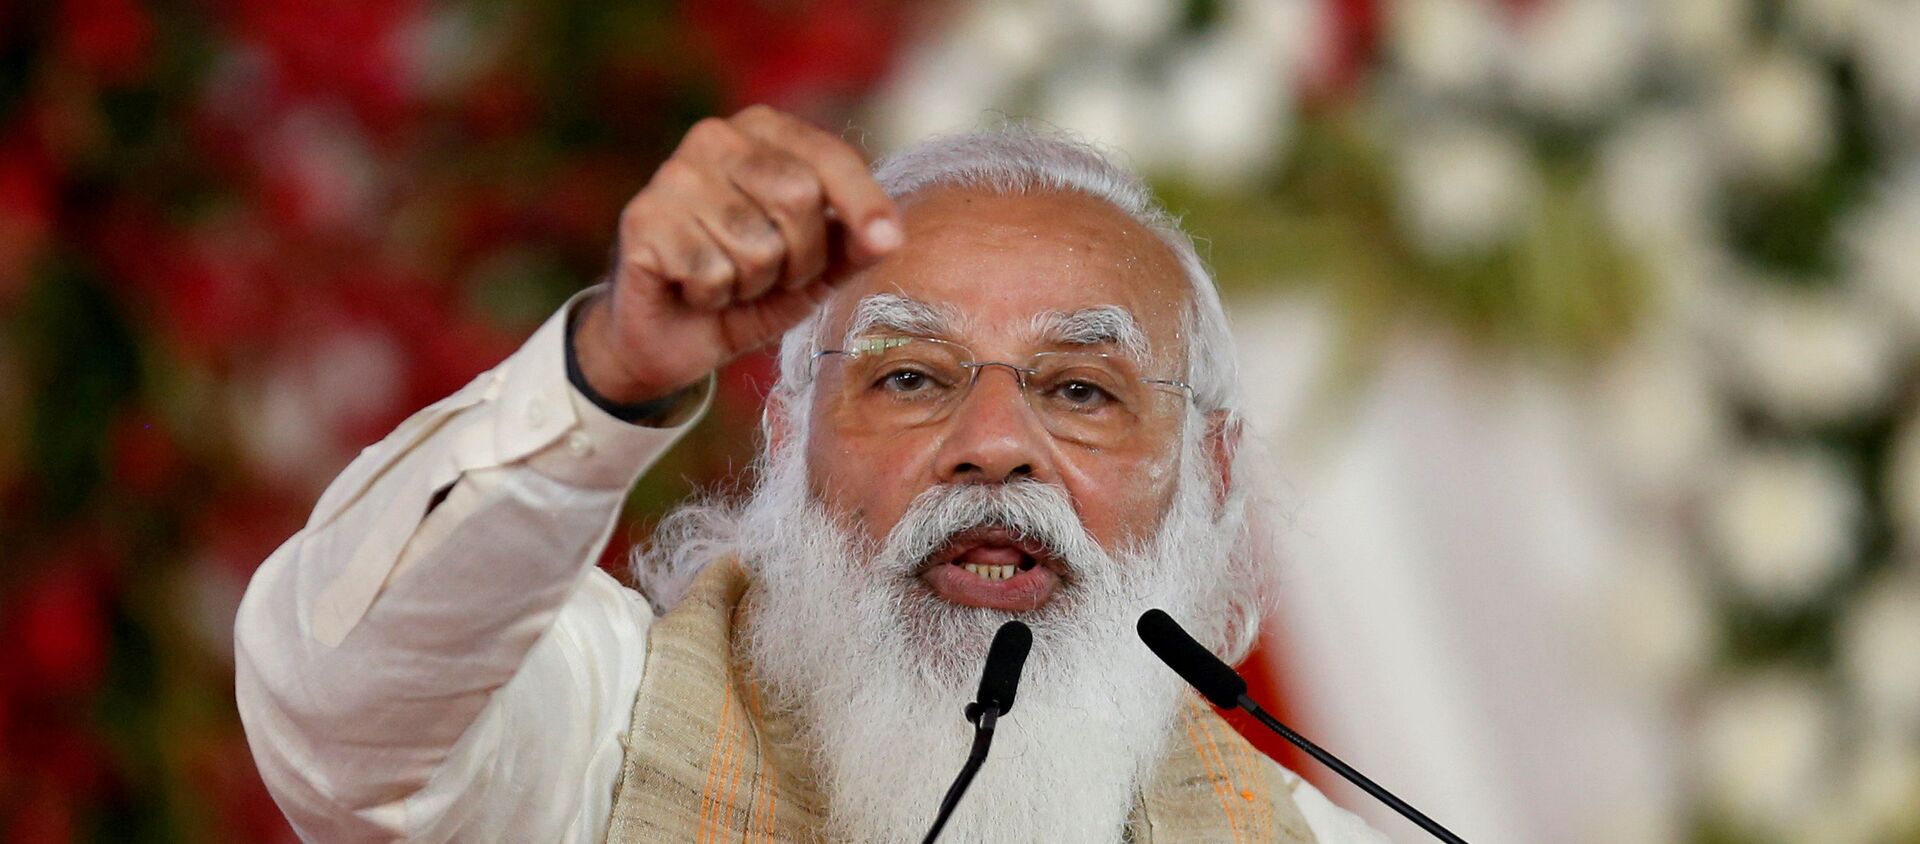 FILE PHOTO: India's Prime Minister Narendra Modi addresses a gathering before flagging off the Dandi March, or Salt March, to celebrate the 75th anniversary of India's Independence, in Ahmedabad, India, March 12, 2021. - Sputnik International, 1920, 21.05.2021